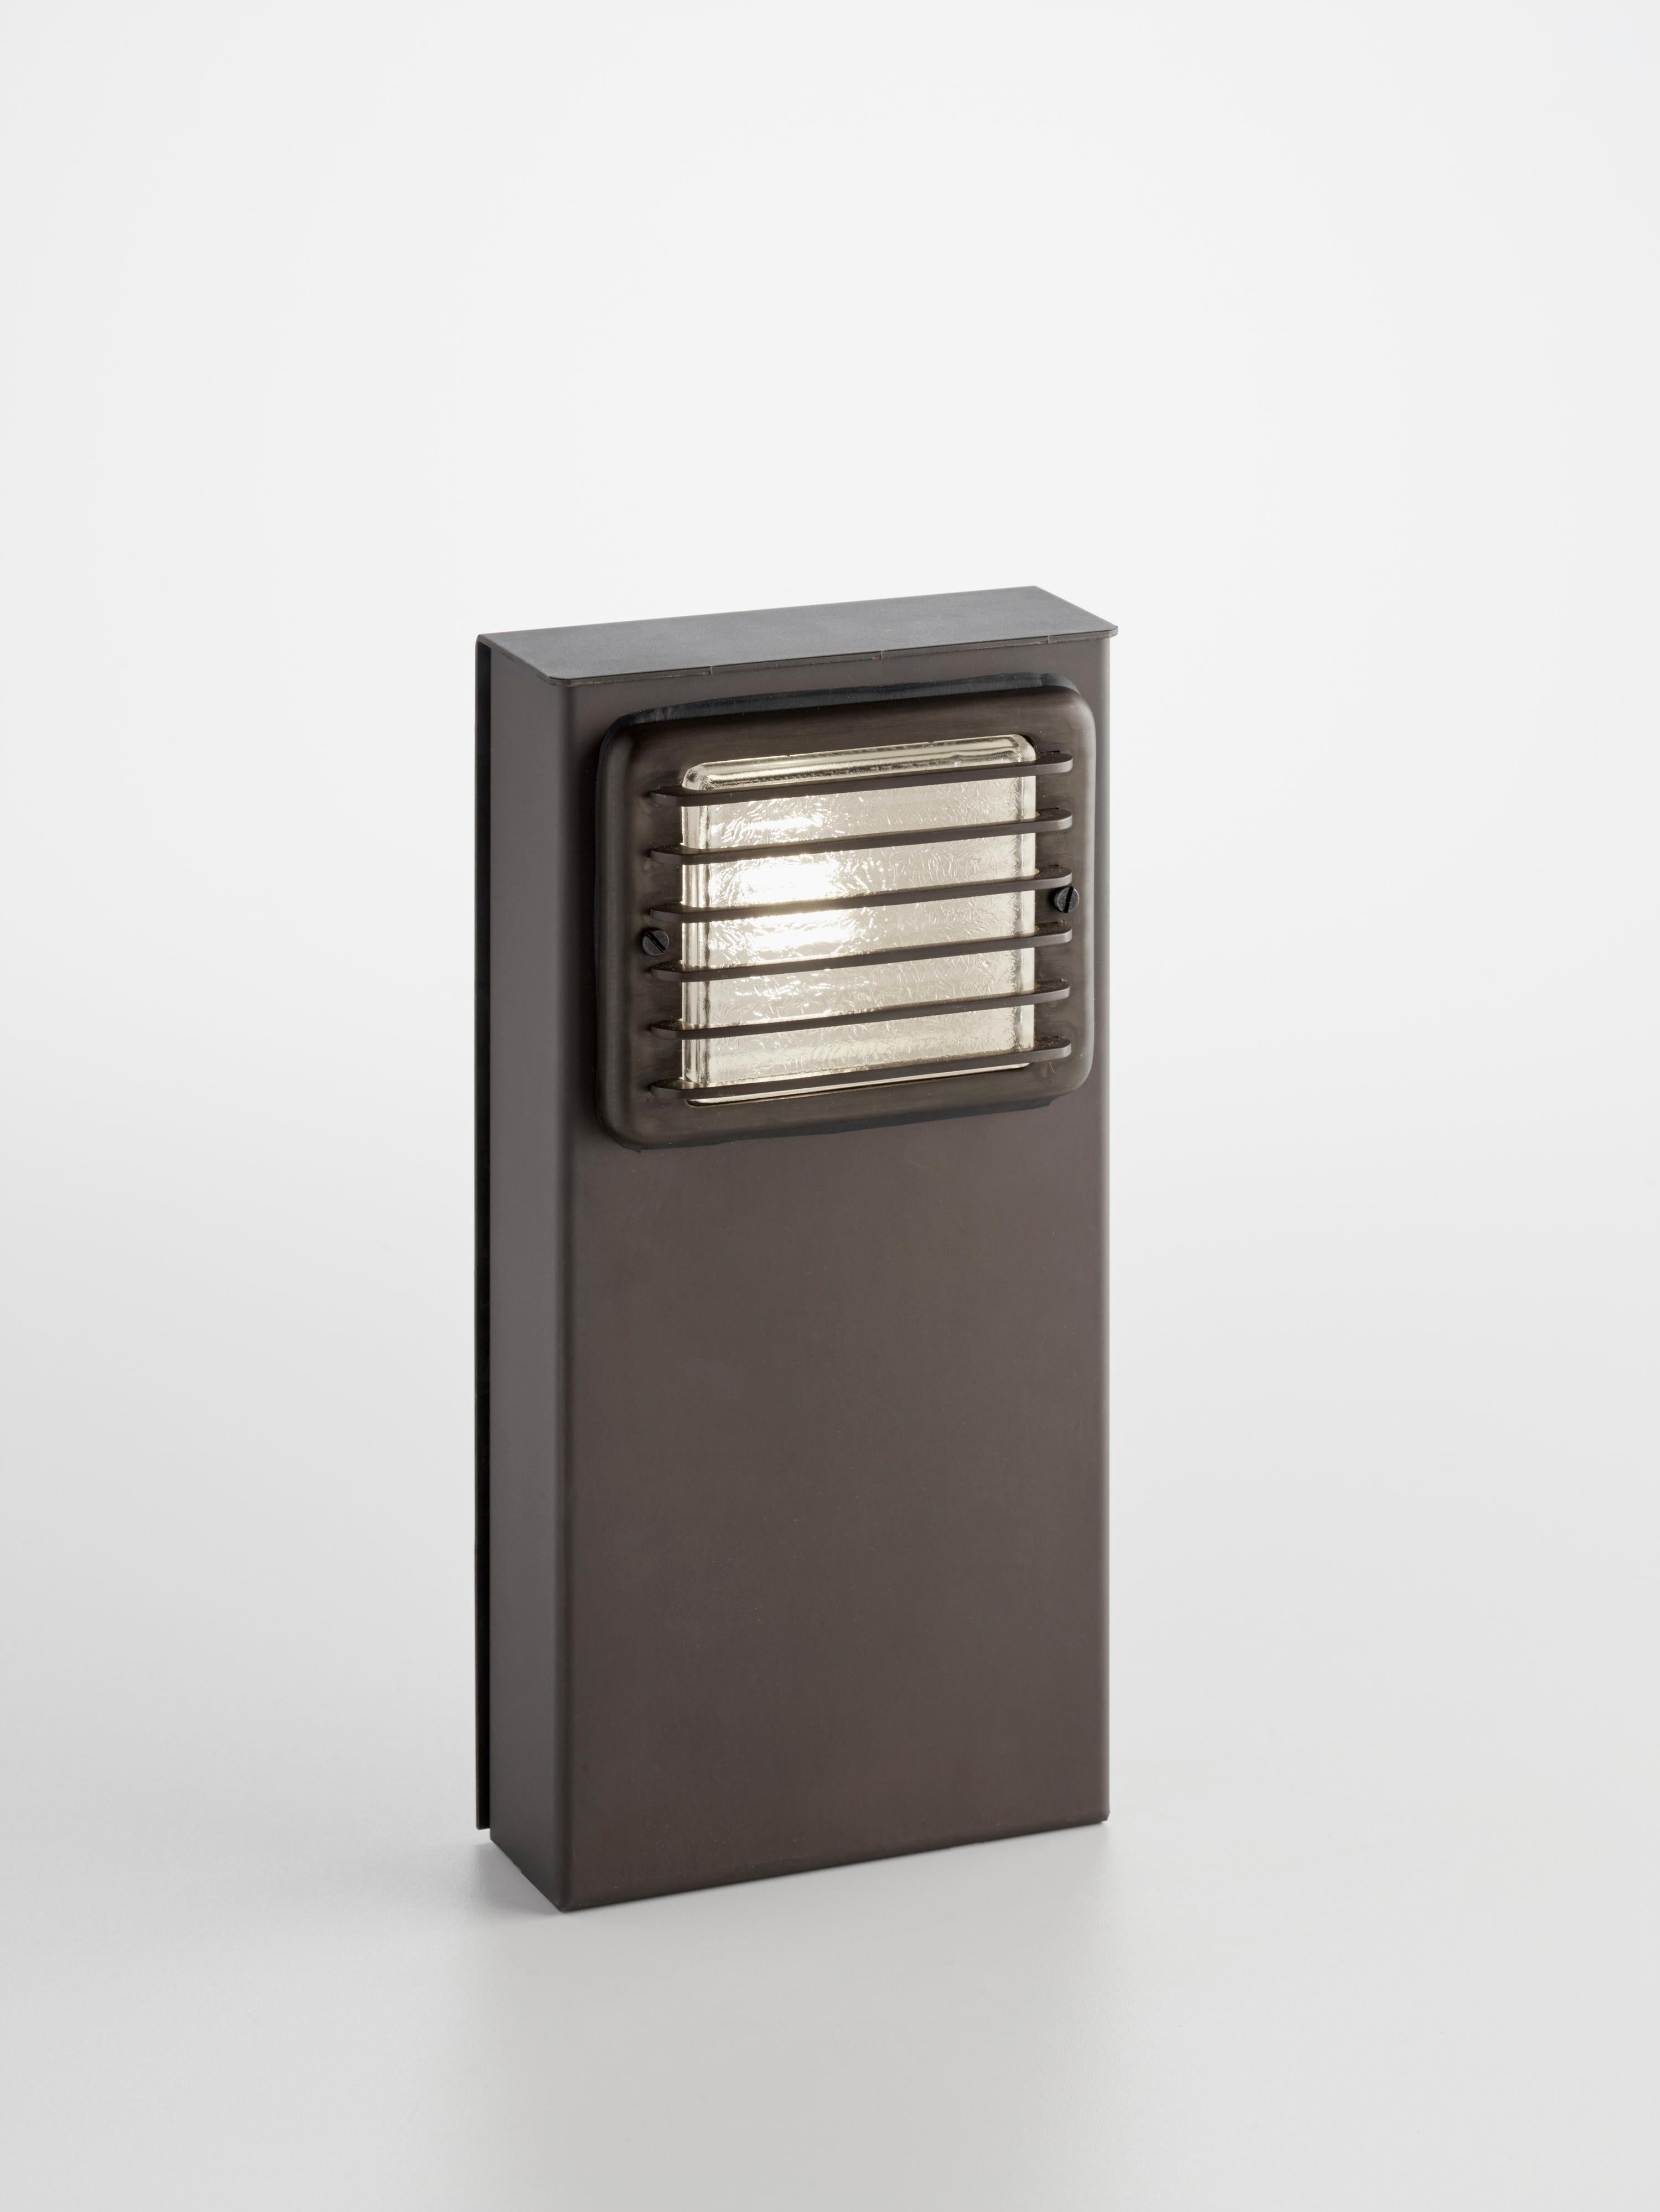 Post light in copper with ‘Steplight’ in dark bronze. With removable back panel for anchoring and electrical connection. For outdoor use (IP54).

LED module 230V 4.3W 2700K 145lm. Main power 230V 50Hz.